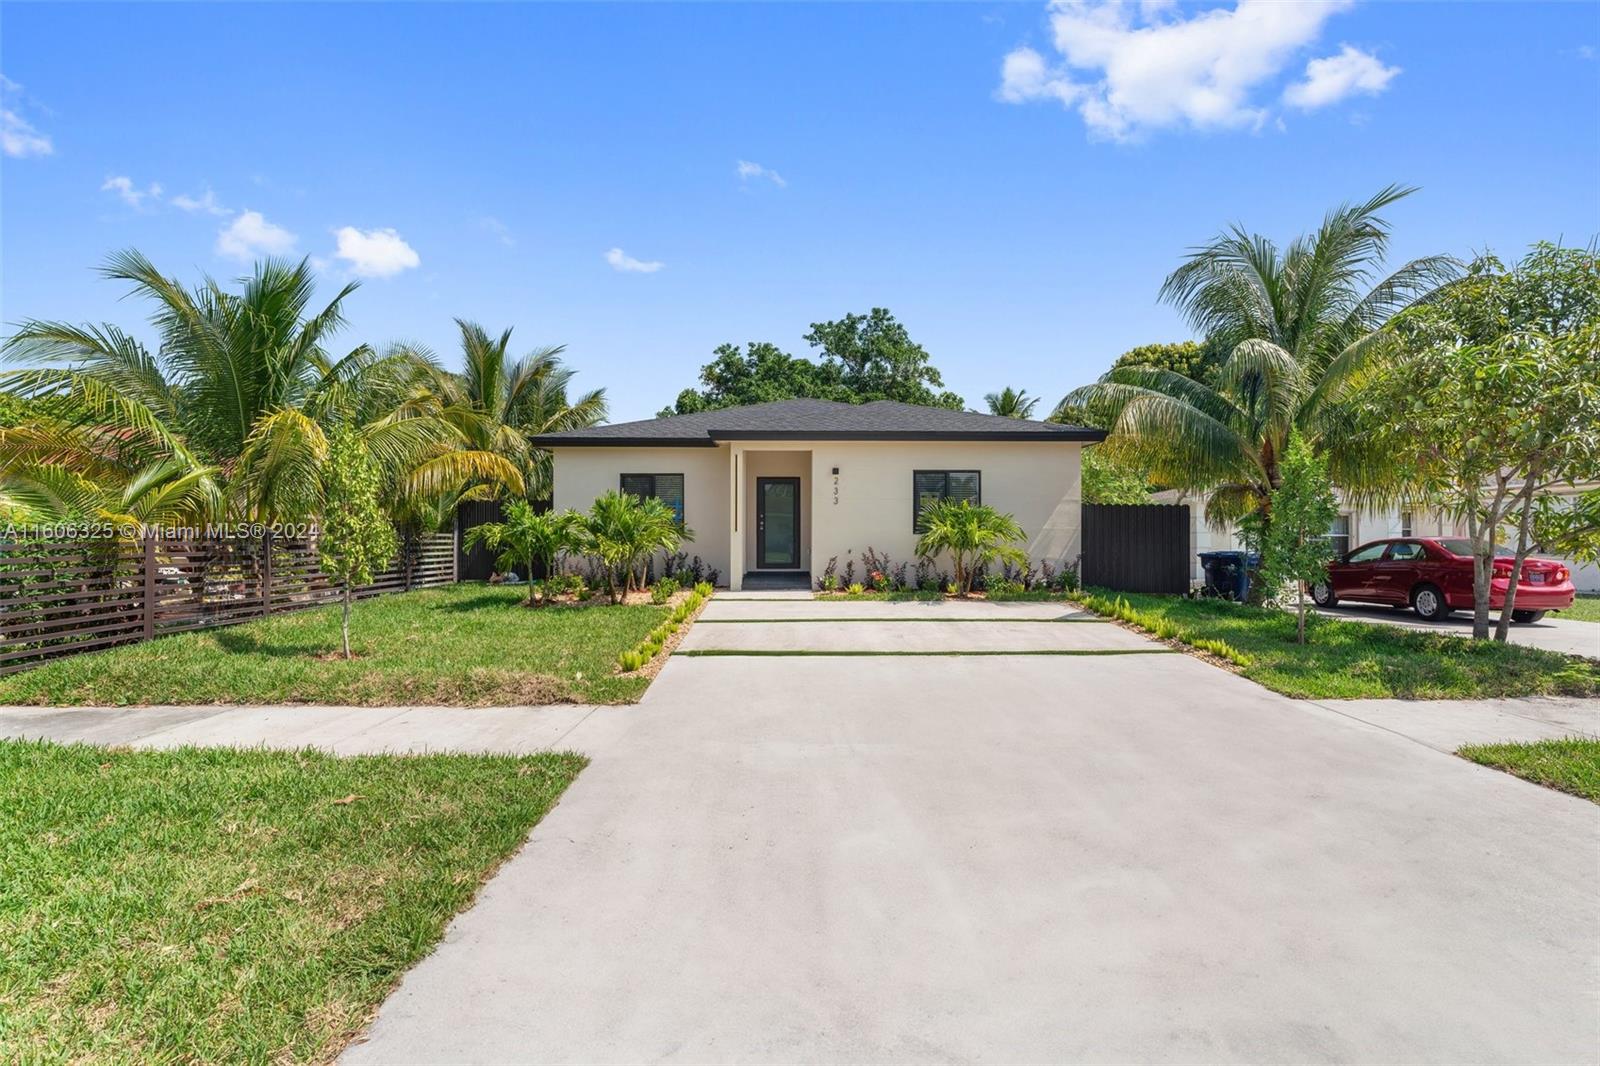 Property for Sale at 233 Nw 120th St, Miami, Broward County, Florida - Bedrooms: 4 
Bathrooms: 3  - $775,000